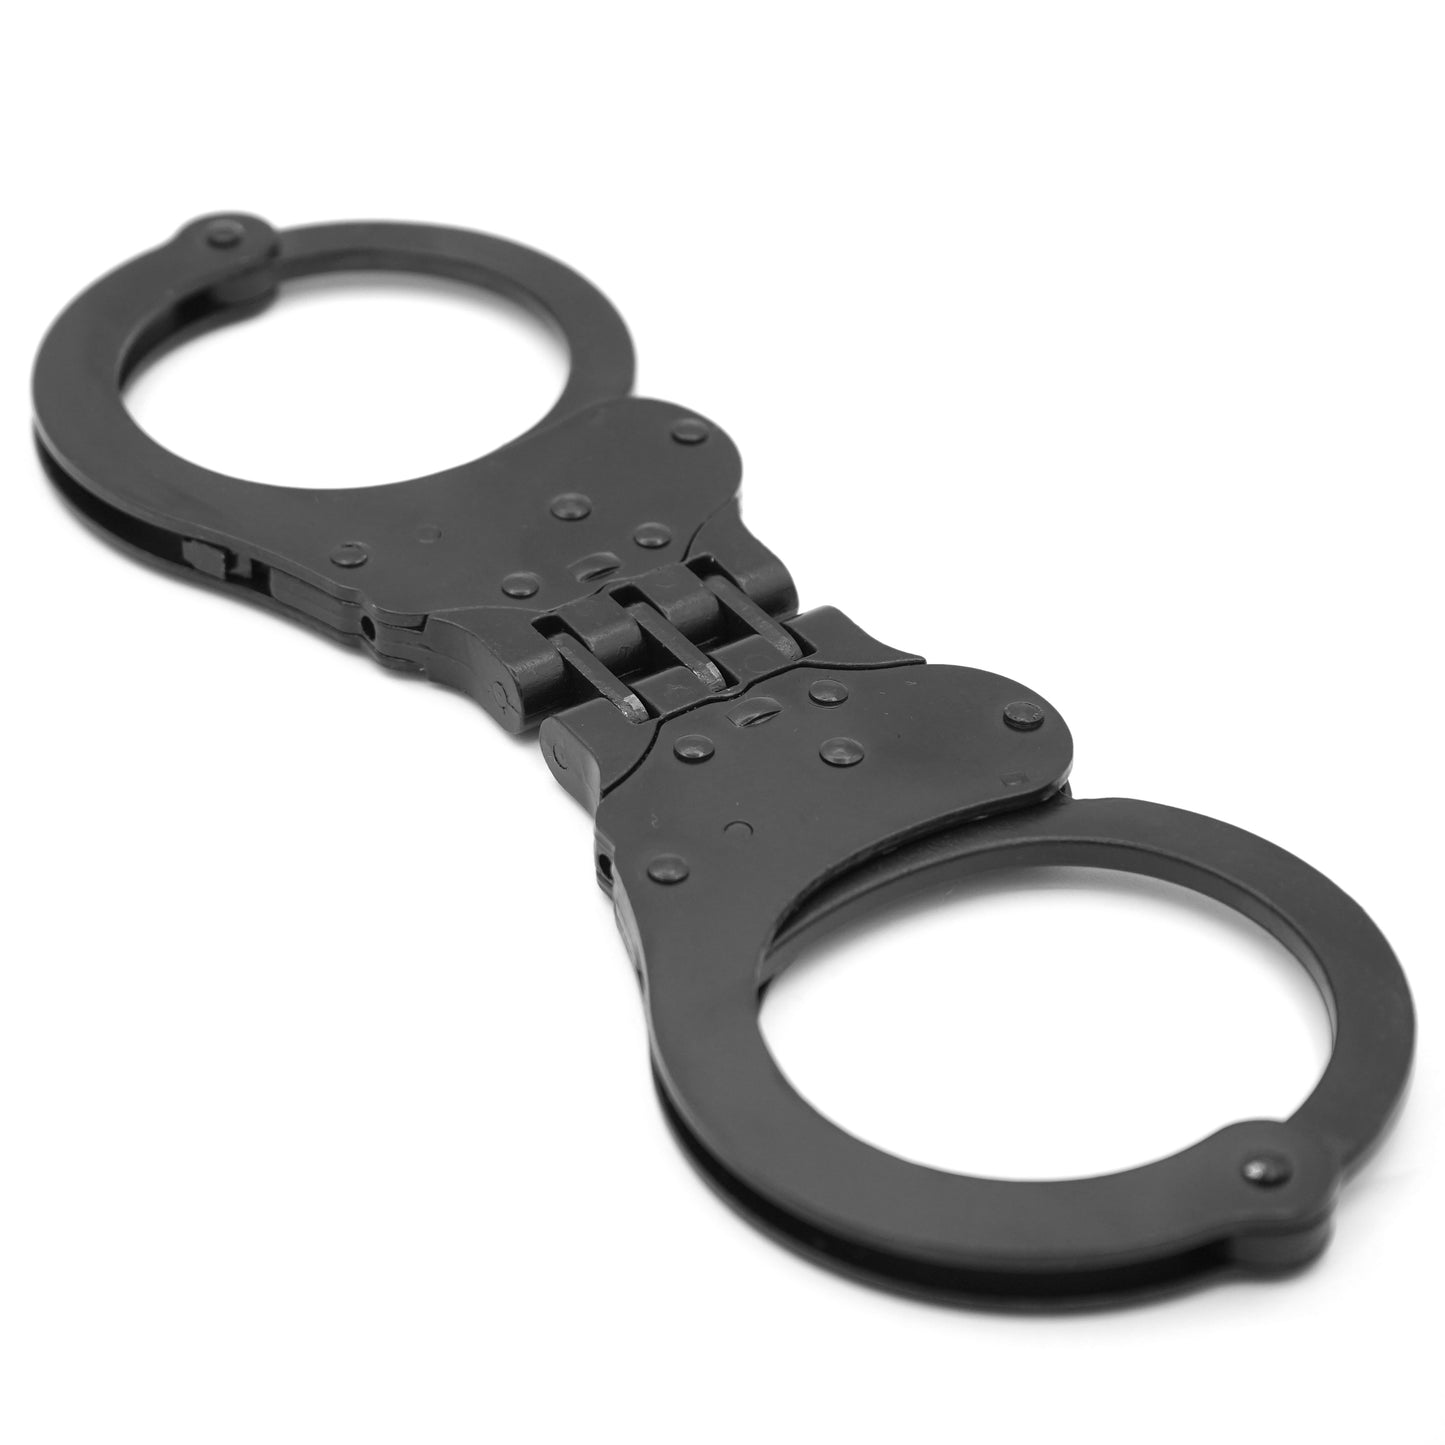 ALCYON 5005 Articulated handcuffs incl. 2 keys, police and bondage